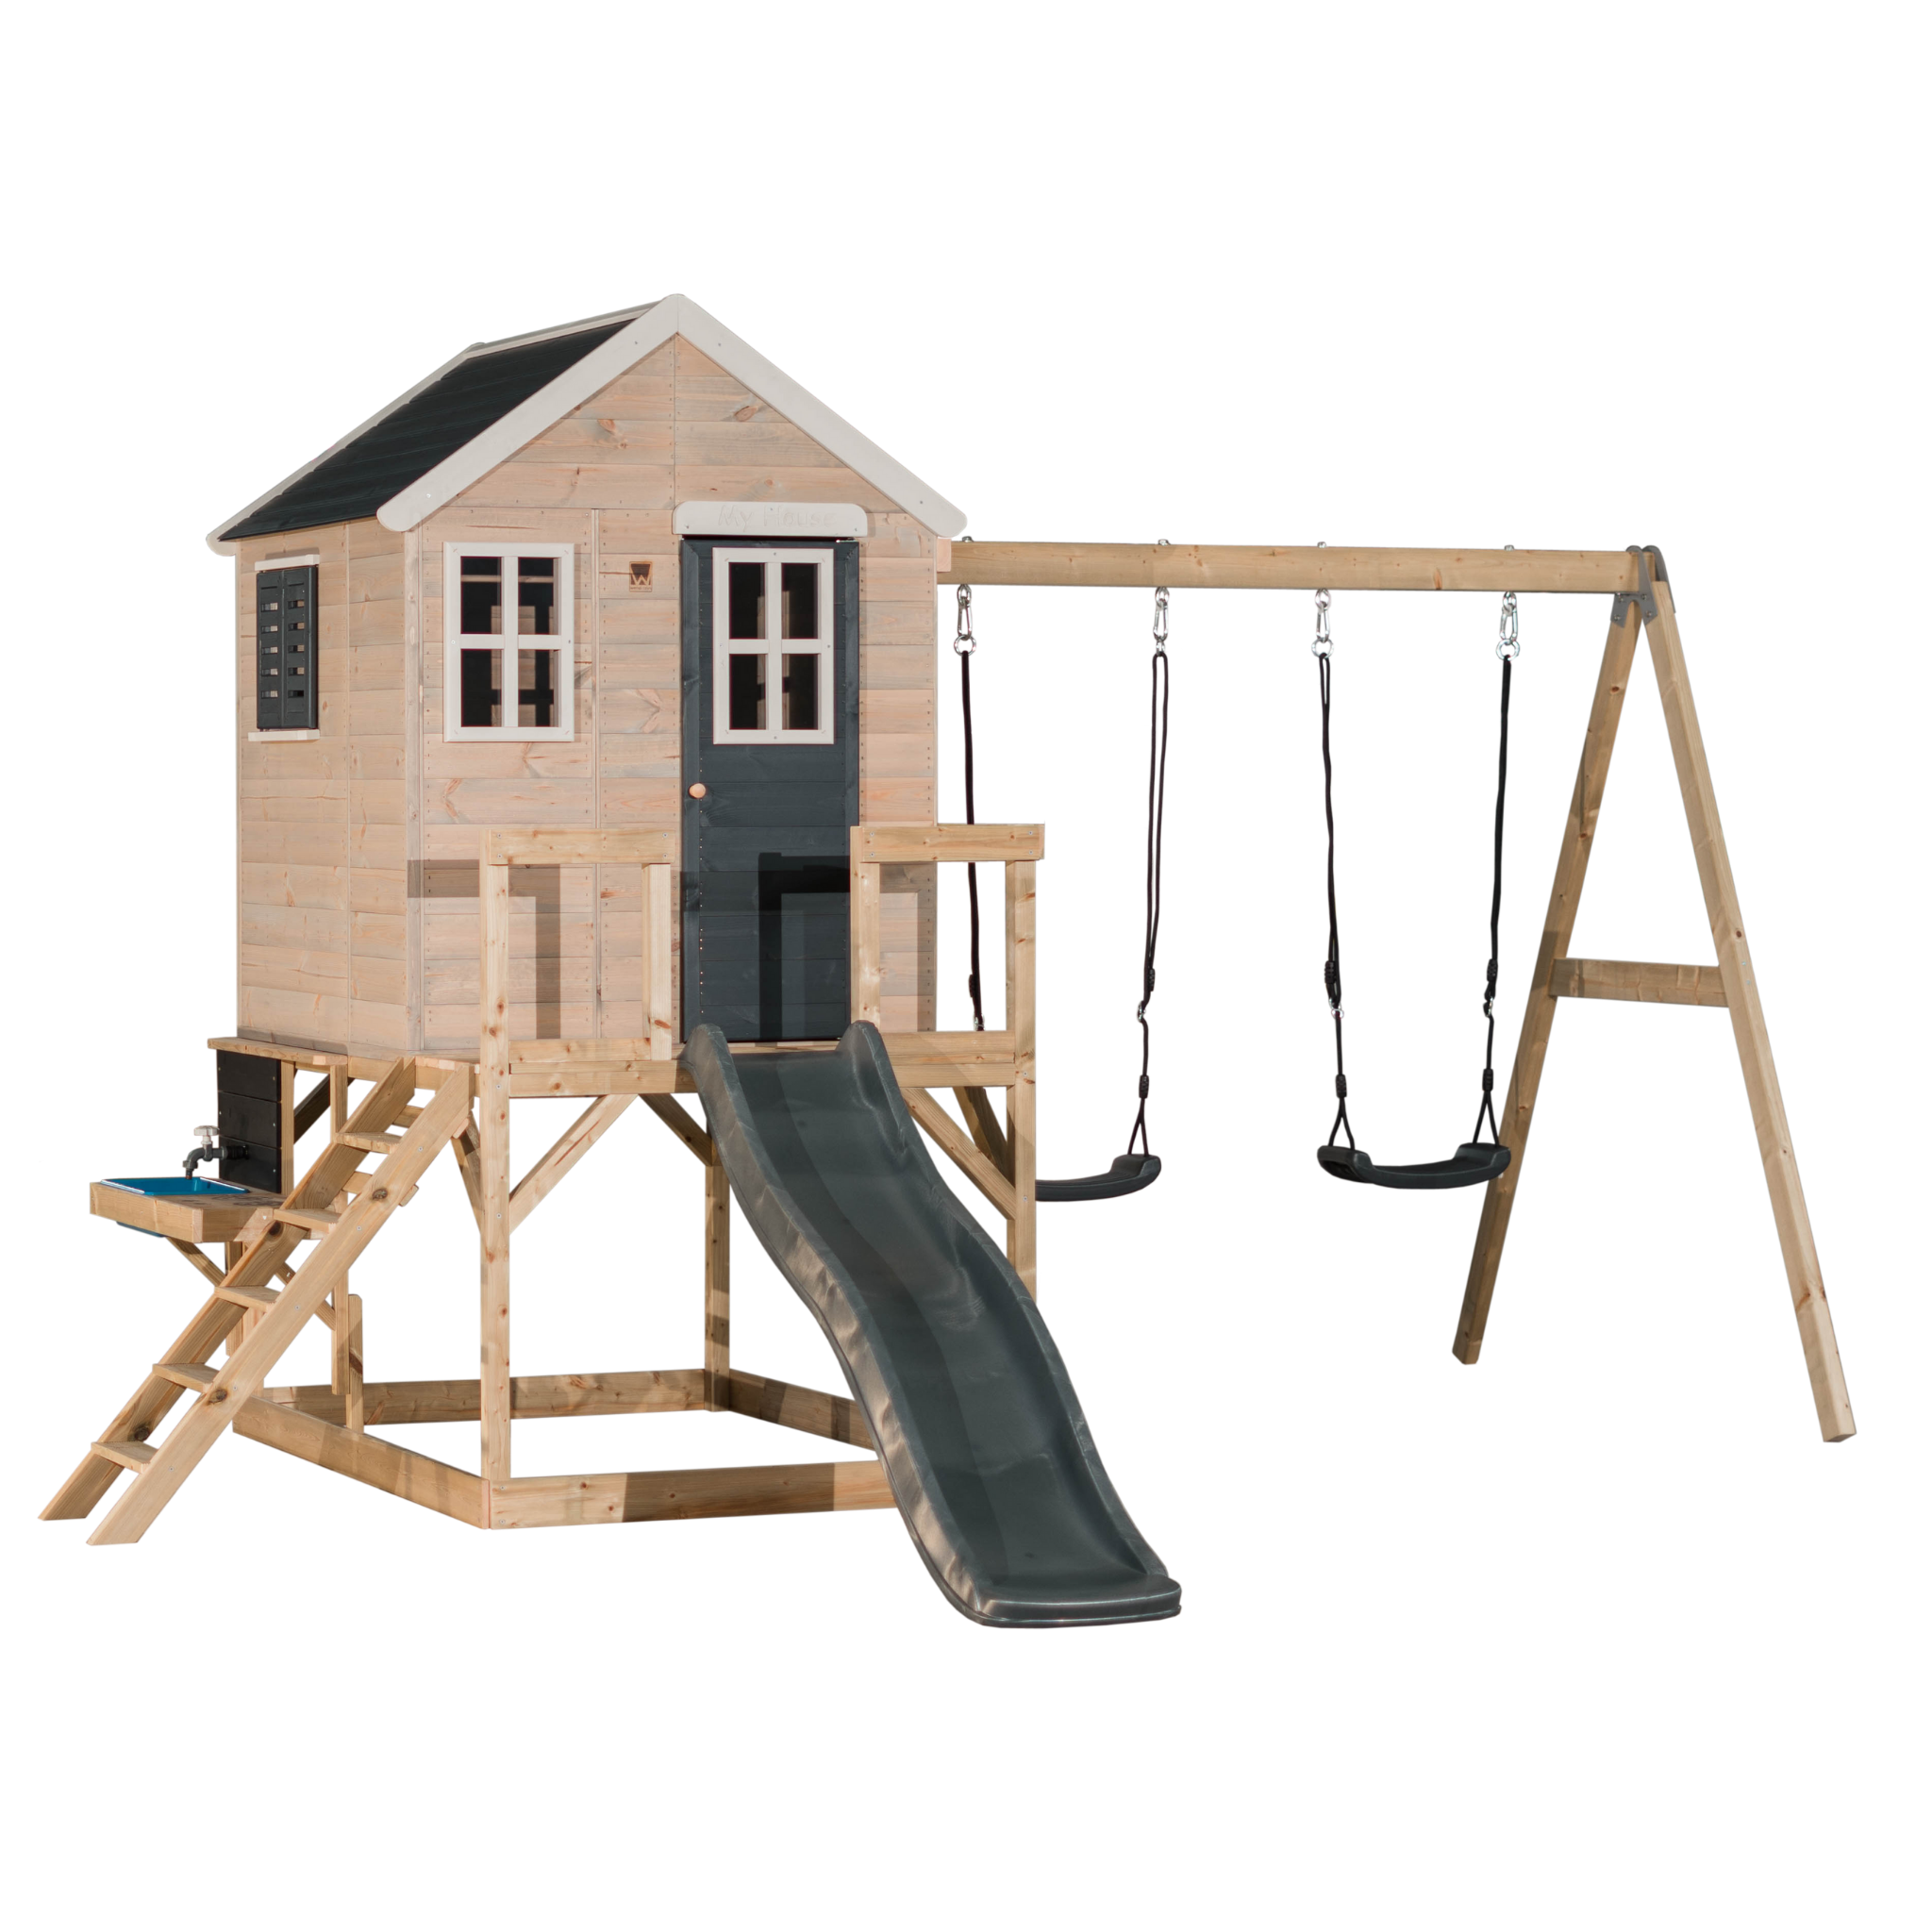 M28-K My Lodge with Platform, Slide and Double Swing + Kitchen Attachment